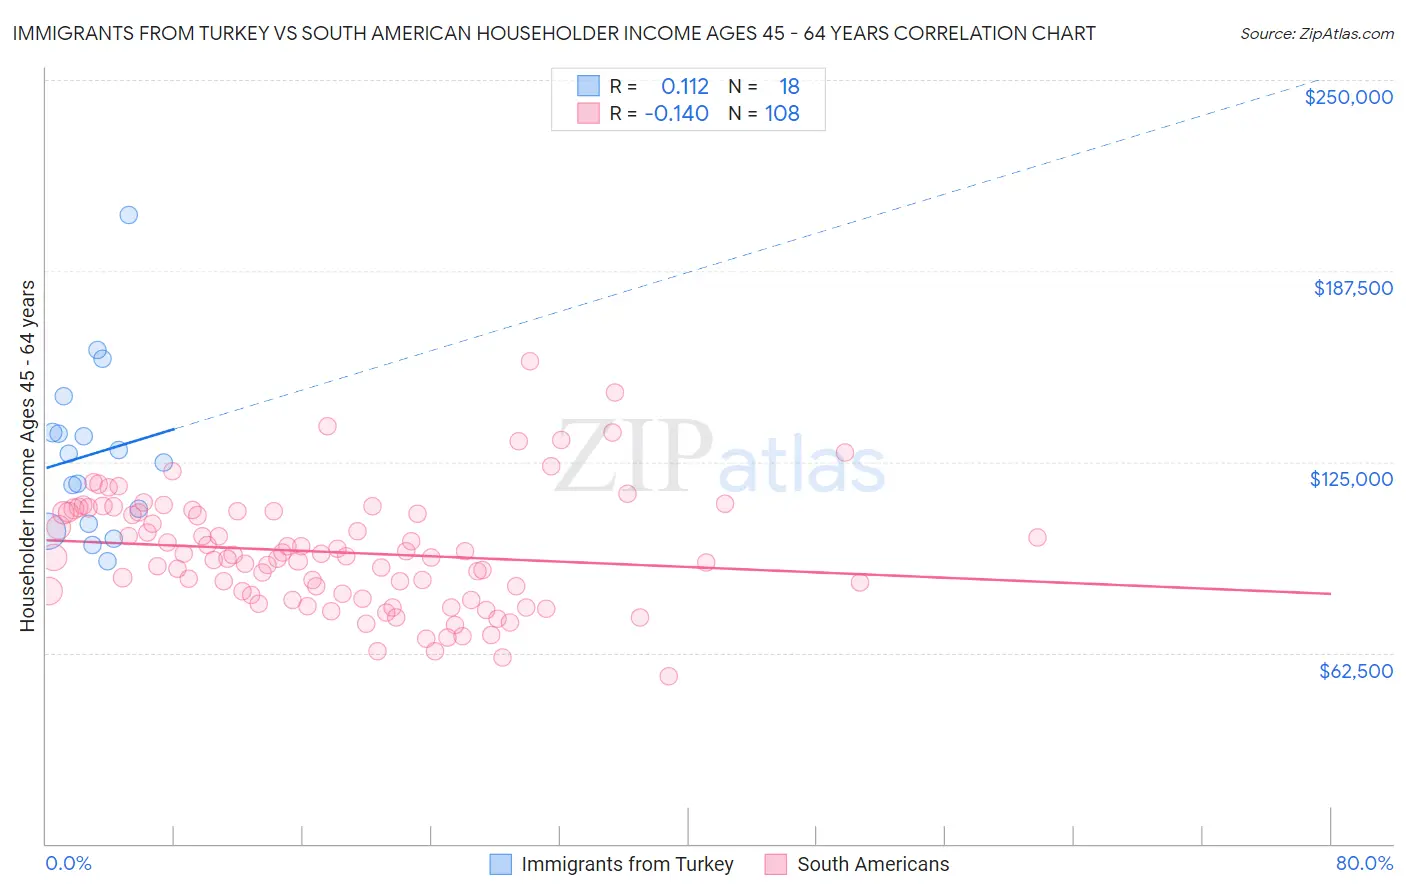 Immigrants from Turkey vs South American Householder Income Ages 45 - 64 years